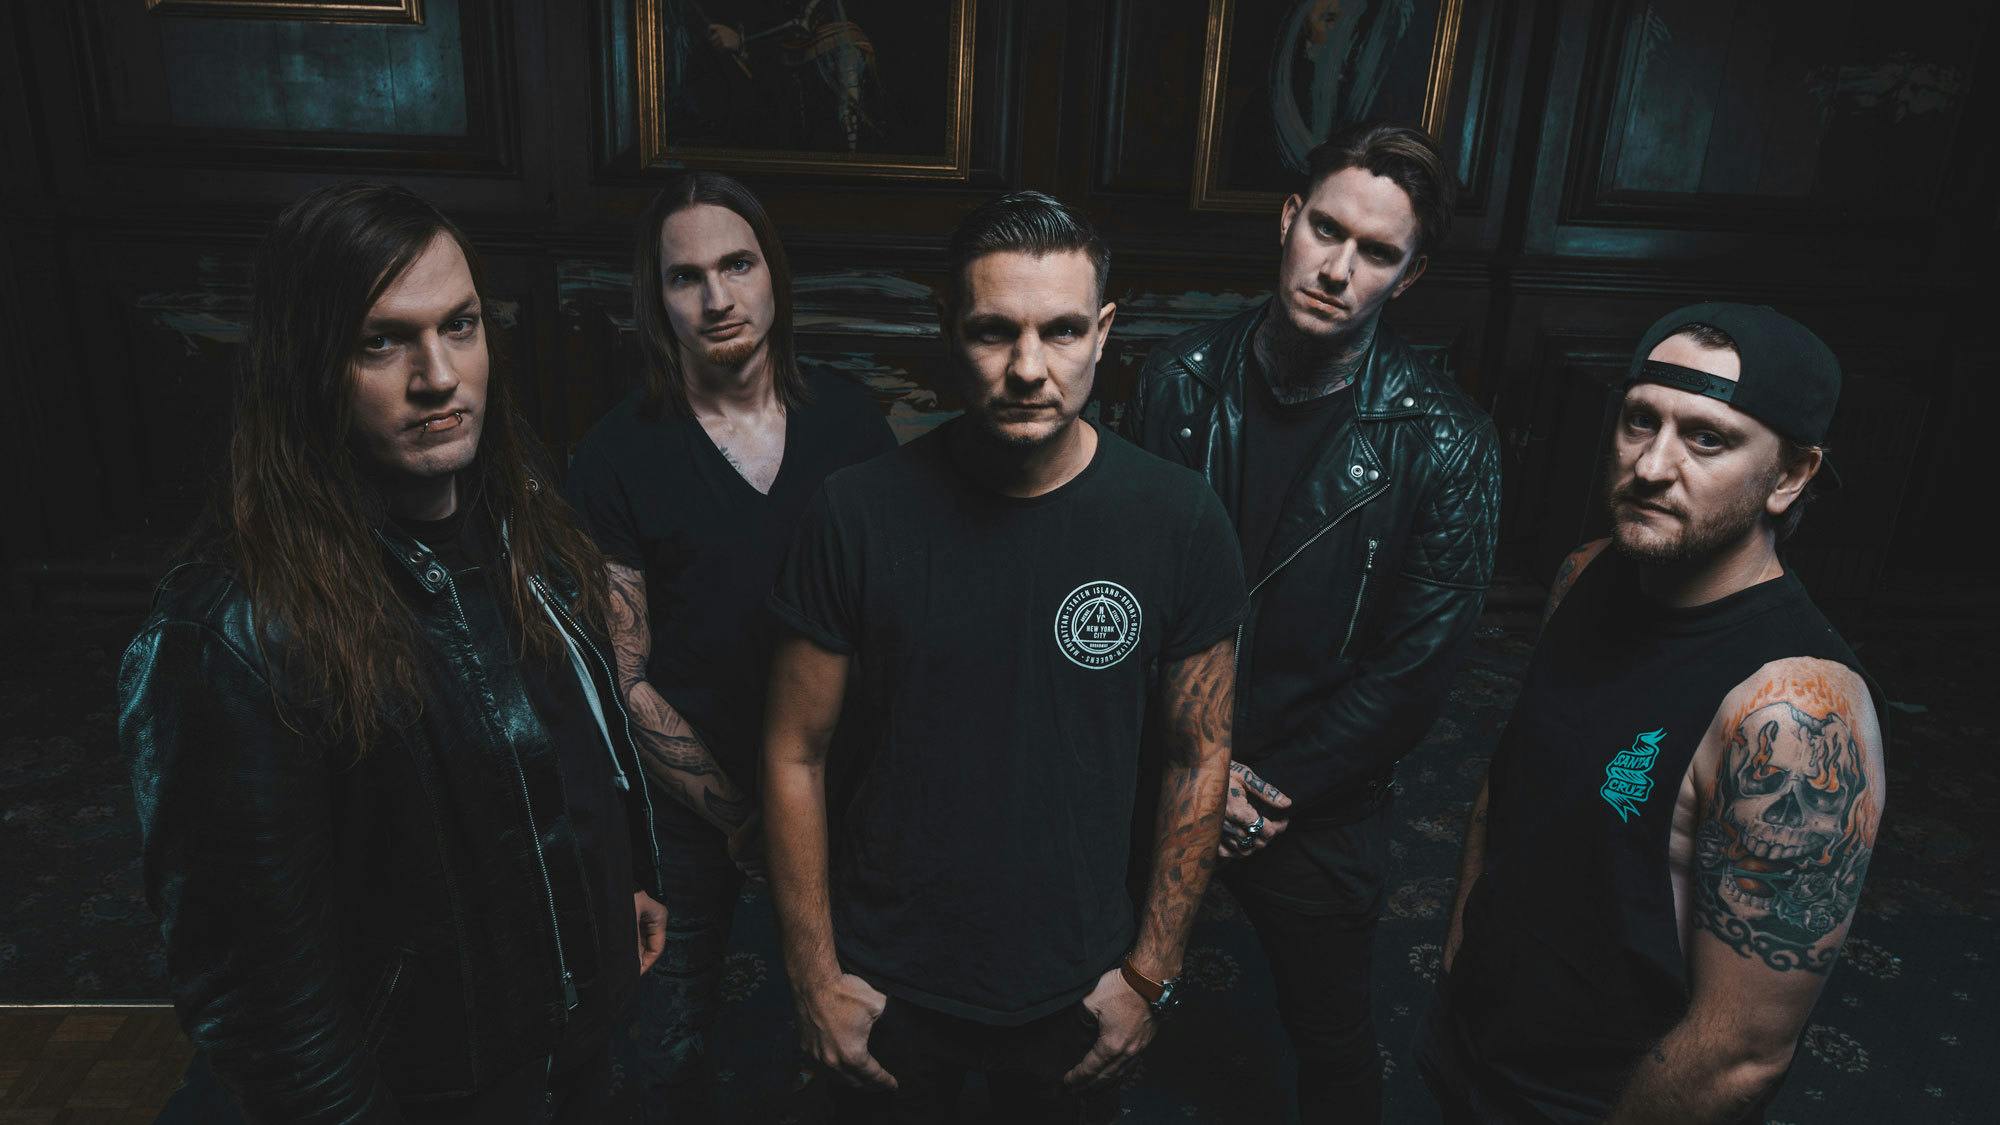 Ex-BFMV Drummer Moose Returns With New Band Kill The Lights